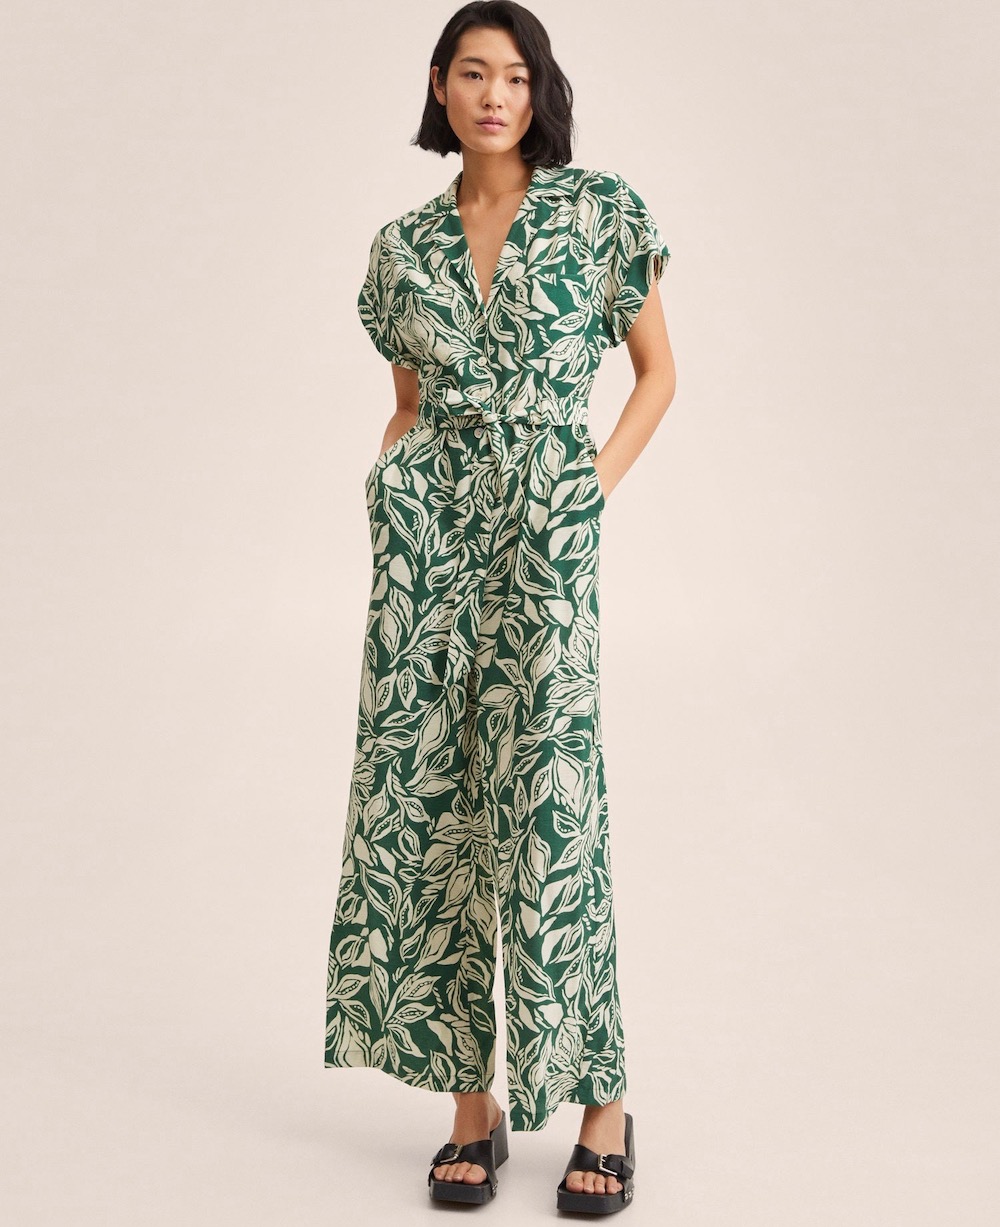 Tropical Printed Pieces for Summer - theFashionSpot